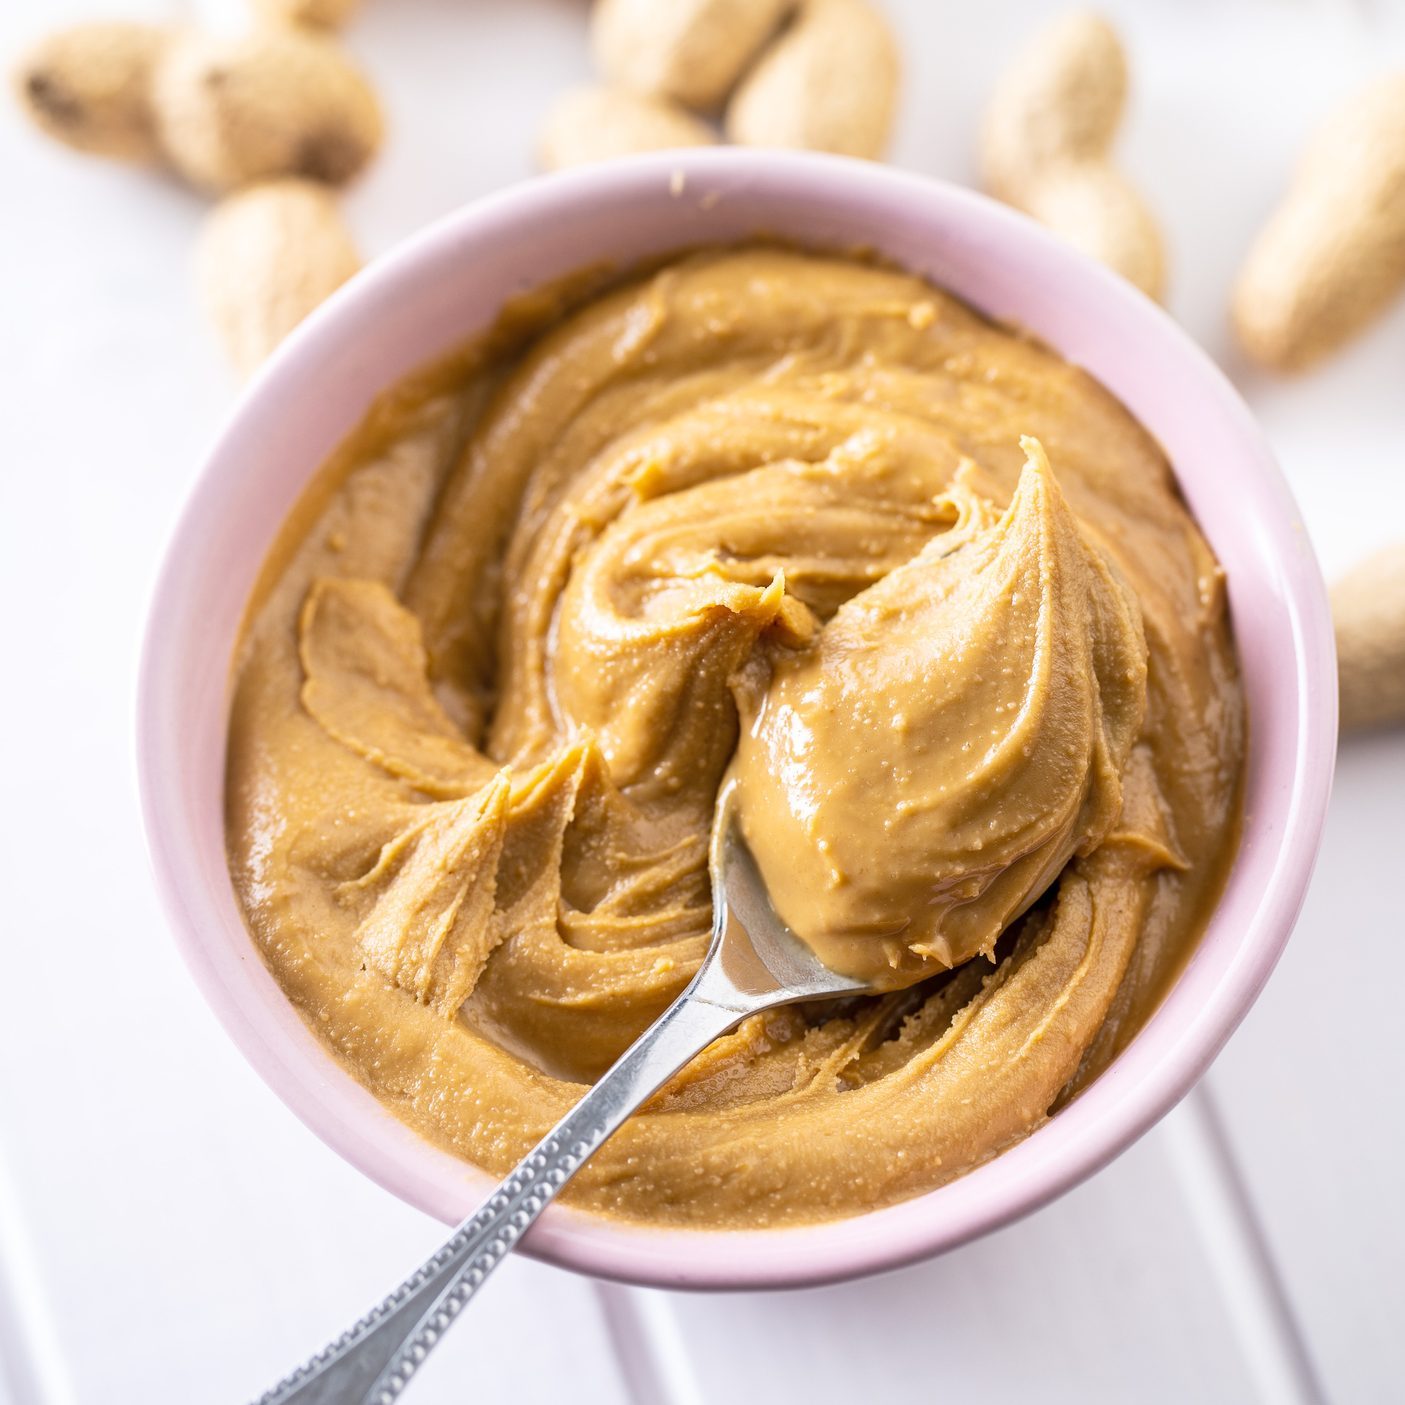 Peanut butter in bowl and peanuts